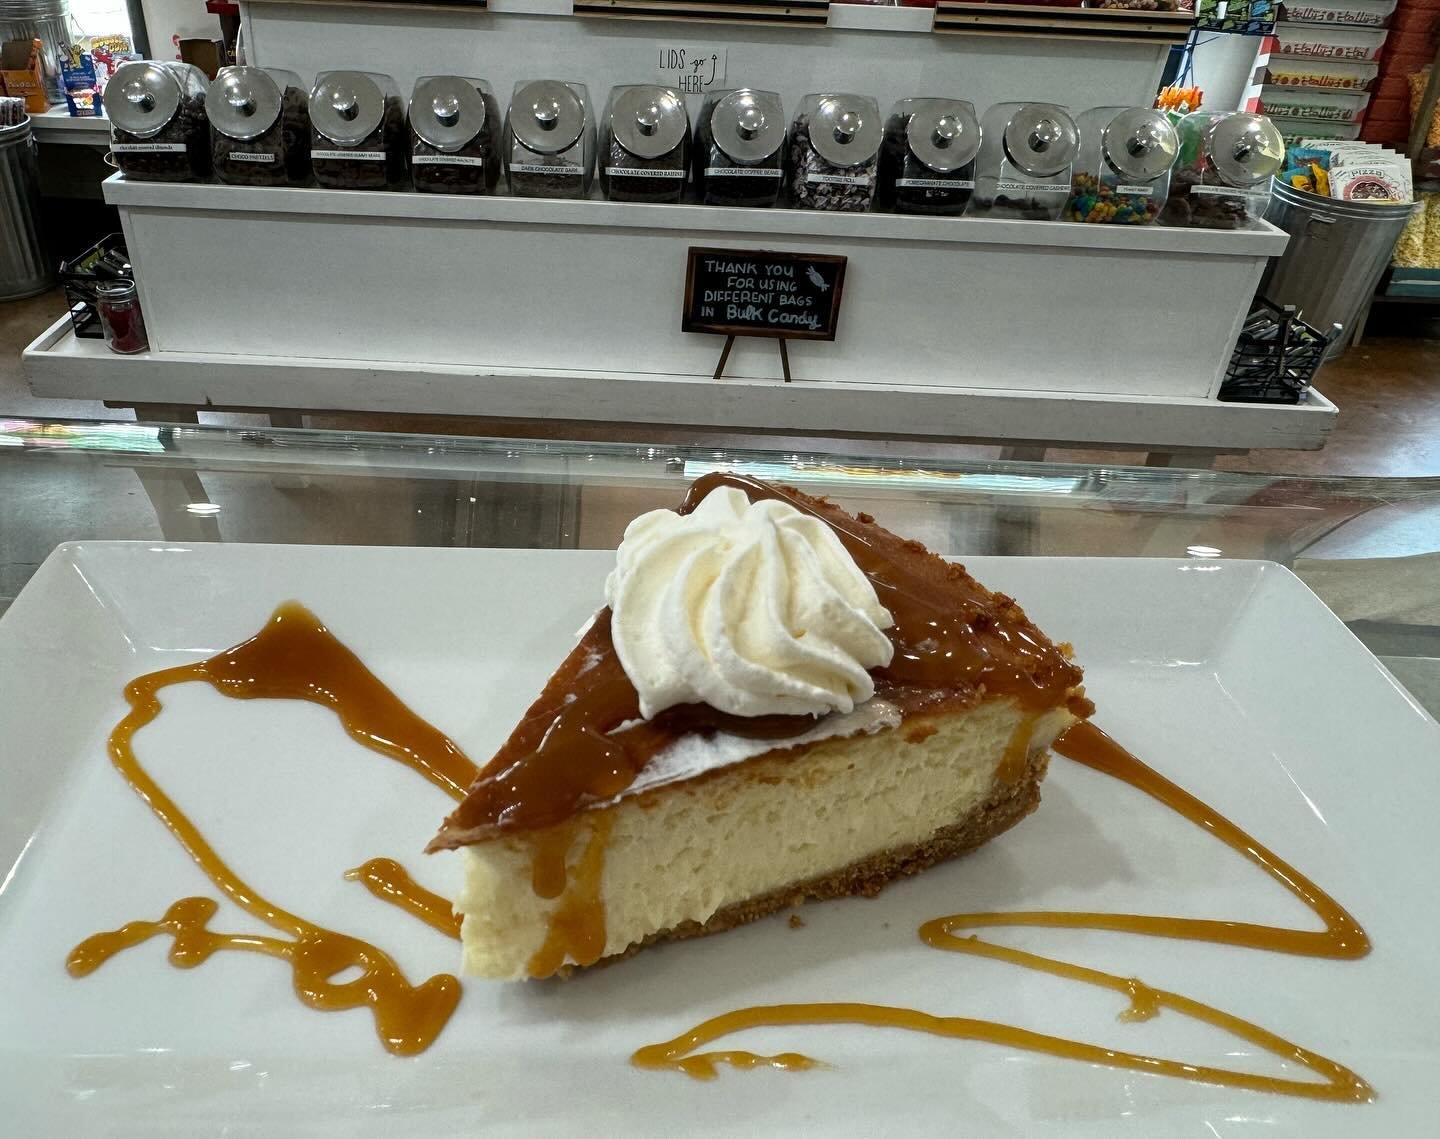 Don&rsquo;t mind us showing off our new Salted Caramel Cheesecake! 🍰🍰 A mixture of everything good and delicious!! 
Come in for a slice!
&bull;
&bull;
#saltyandsweet #cheesecake #sweettreats